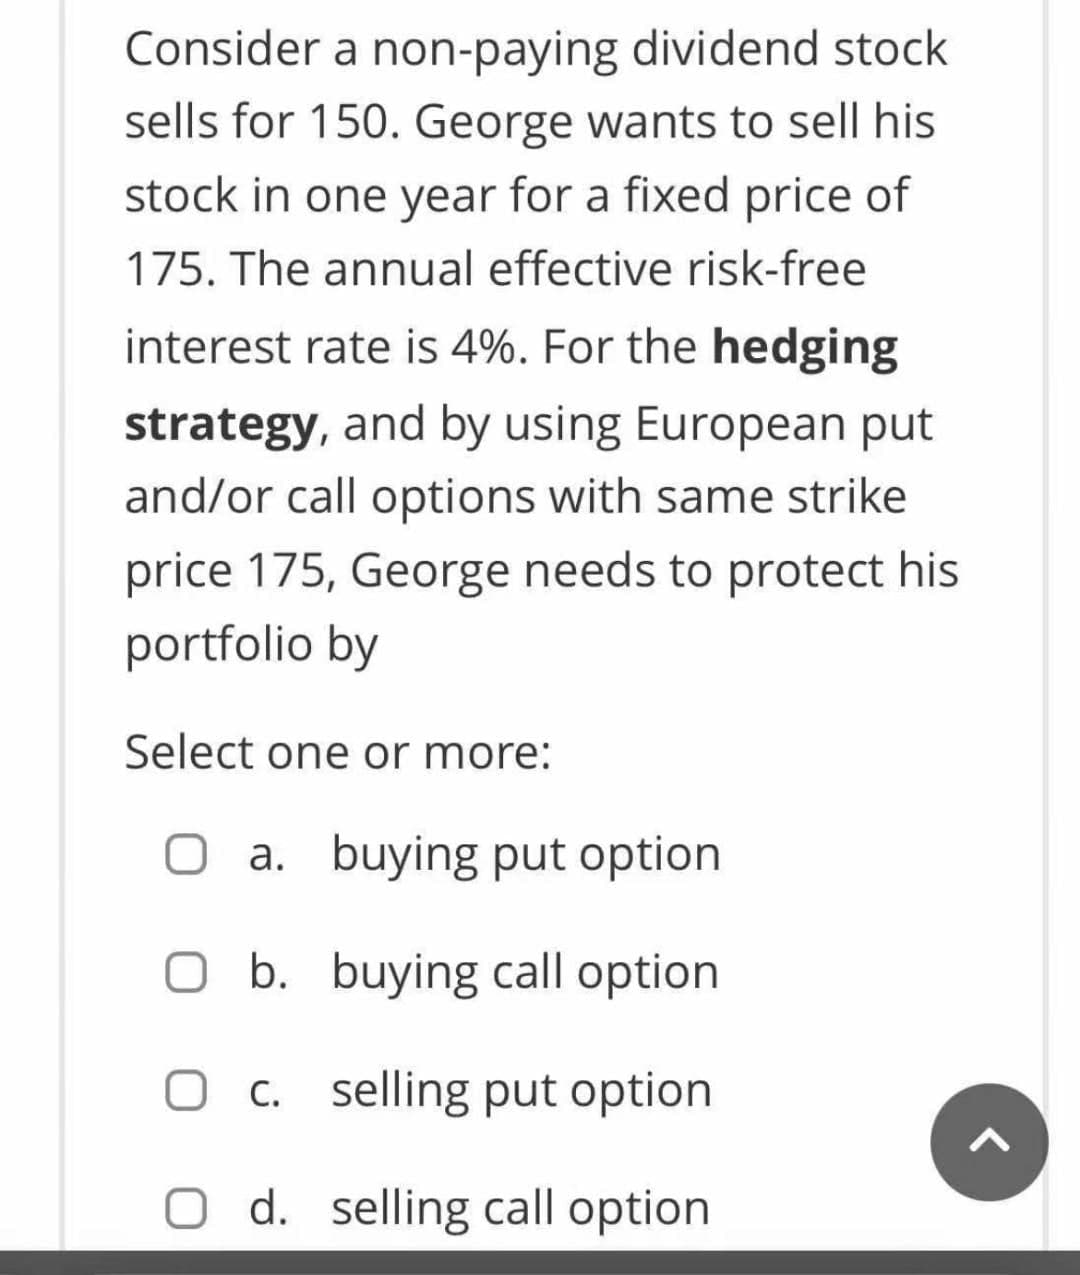 Consider a non-paying dividend stock
sells for 150. George wants to sell his
stock in one year for a fixed price of
175. The annual effective risk-free
interest rate is 4%. For the hedging
strategy, and by using European put
and/or call options with same strike
price 175, George needs to protect his
portfolio by
Select one or more:
O a. buying put option
O b. buying call option
O c. selling put option
0 d. selling call option
